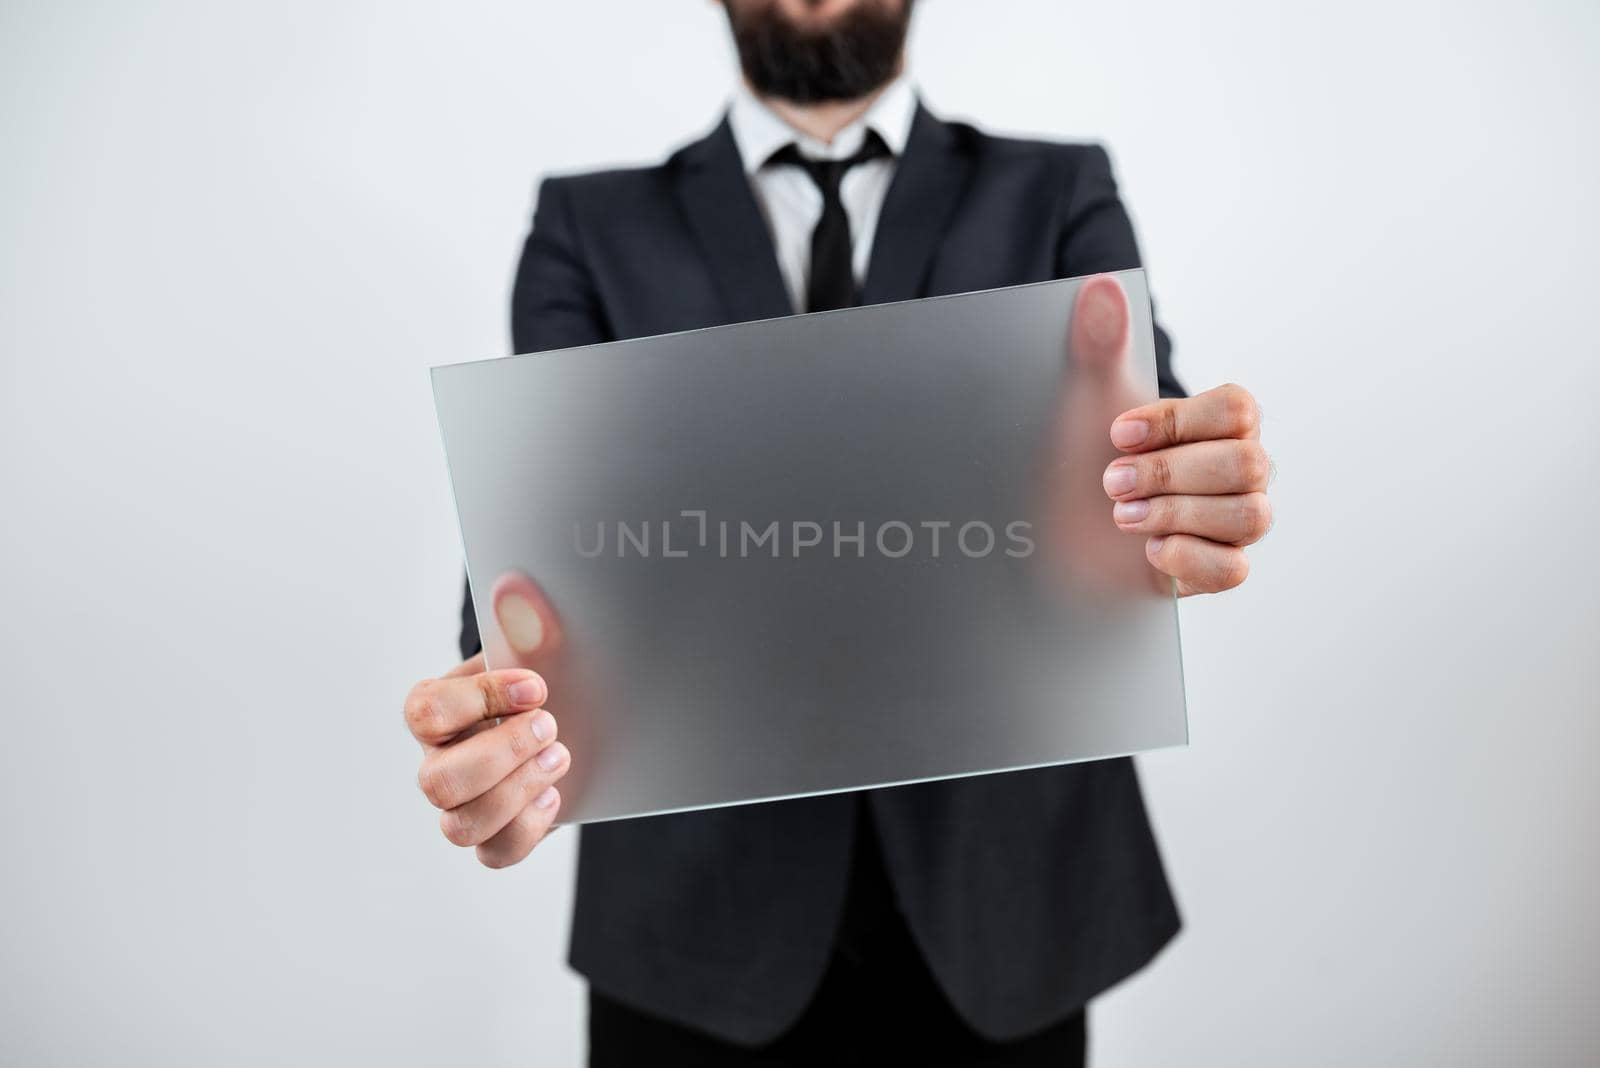 Male Professional Holding Blank Placard And Displaying Business Data. Businessman Wearing Suit Showing Rectangular Board For Marketing And Advertising The Company. by nialowwa